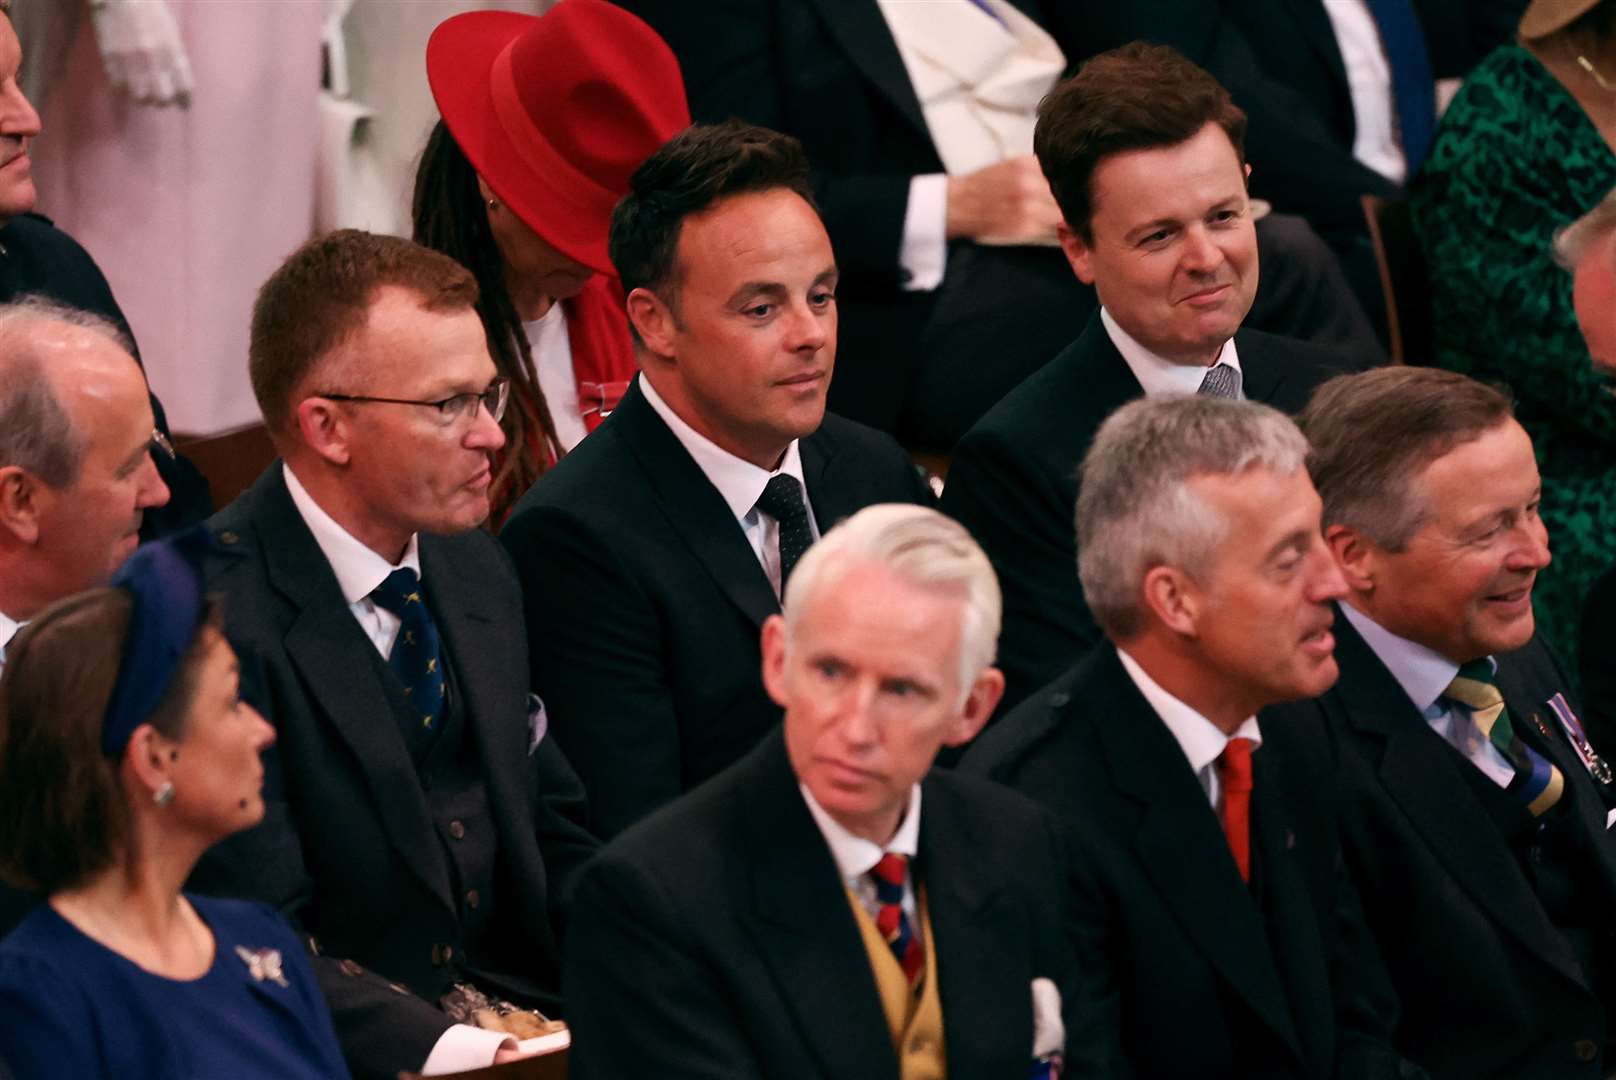 Presenters Ant McPartlin and Declan Donnelly in the pews ahead of the coronation at Westminster Abbey (Phil Noble/PA)